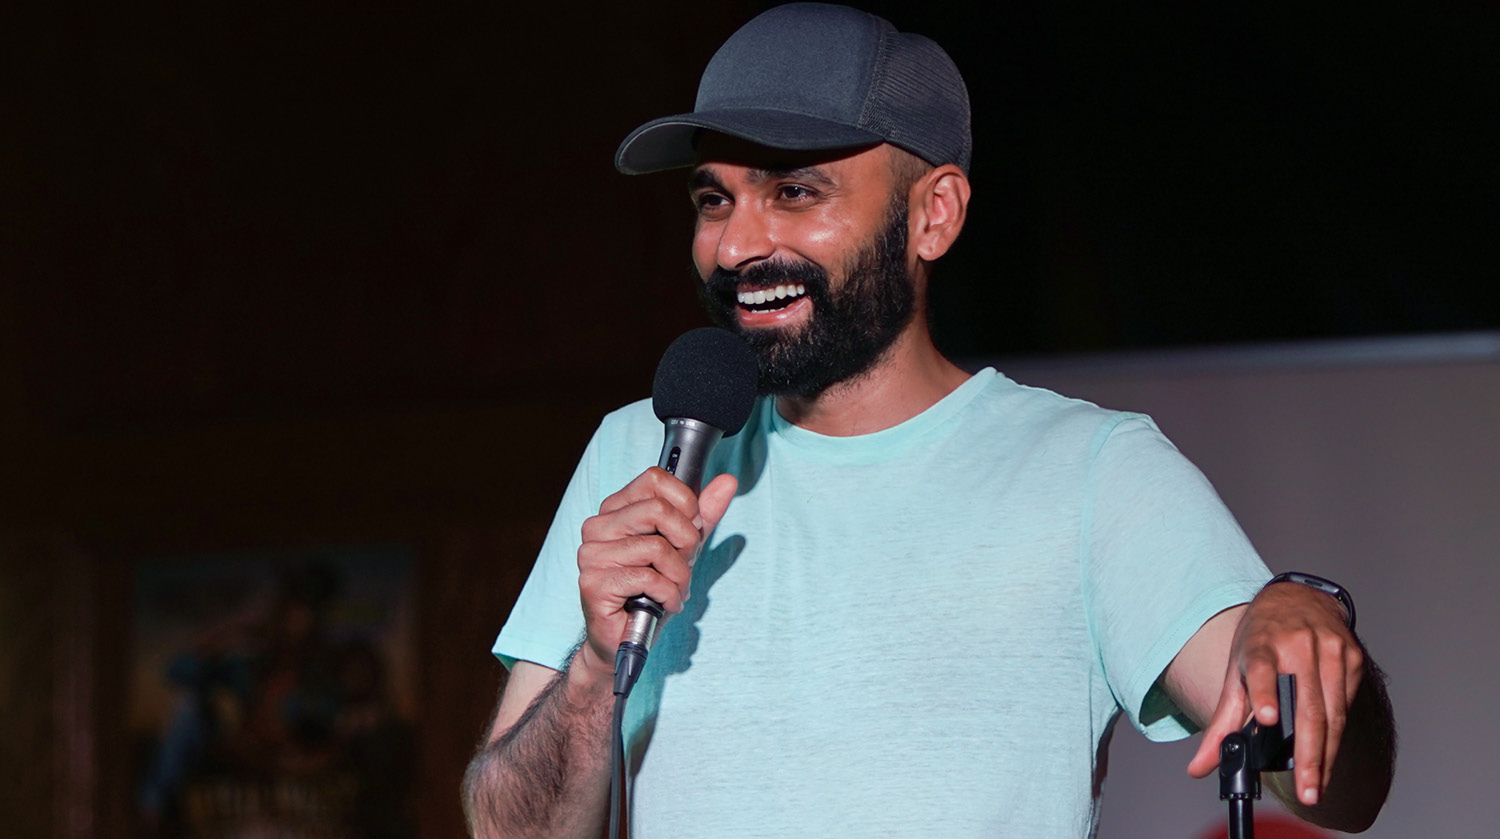 Image of curator Sunny Chahal holding a microphone up to his mouth and smiling. He has medium skin, dark hair and facial hair. He’s wearing a black baseball cap, a light blue t-shirt. He’s also wearing a watch on his left wrist and holding onto a microphone stand. The background is gray and black. 